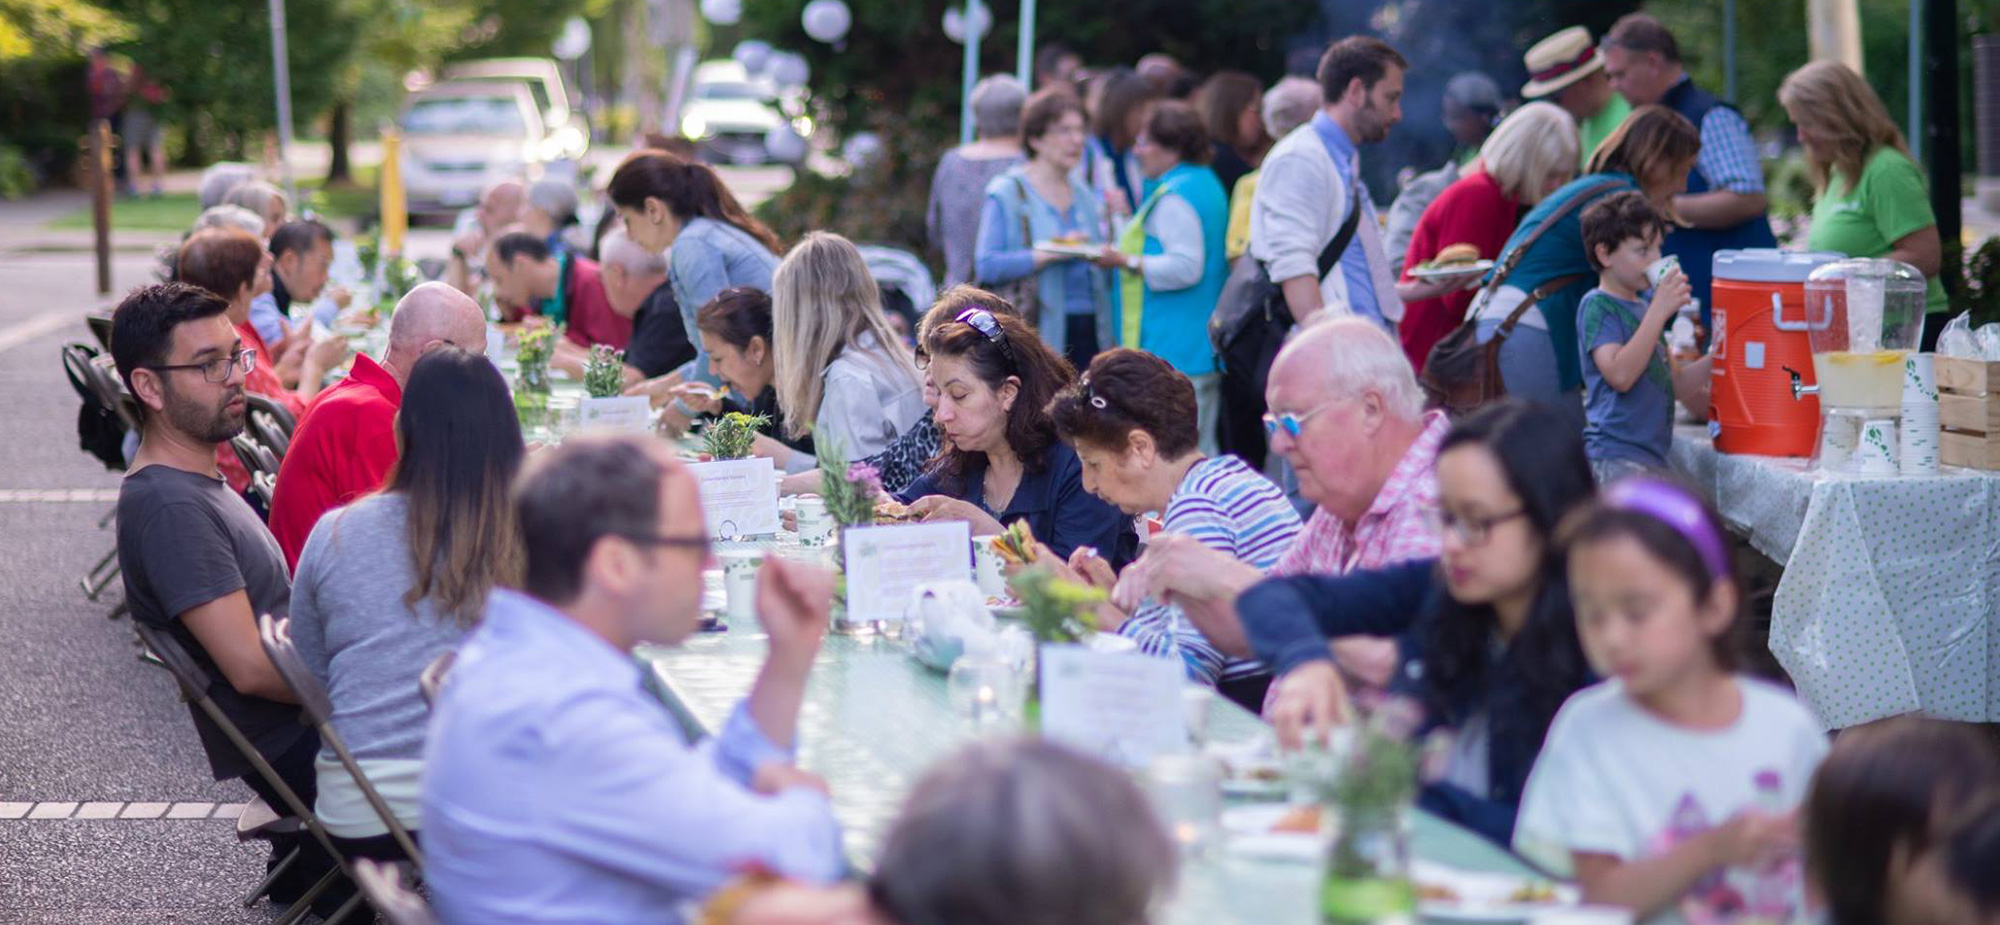 People of all ages sit at a long table outdoors eating food.